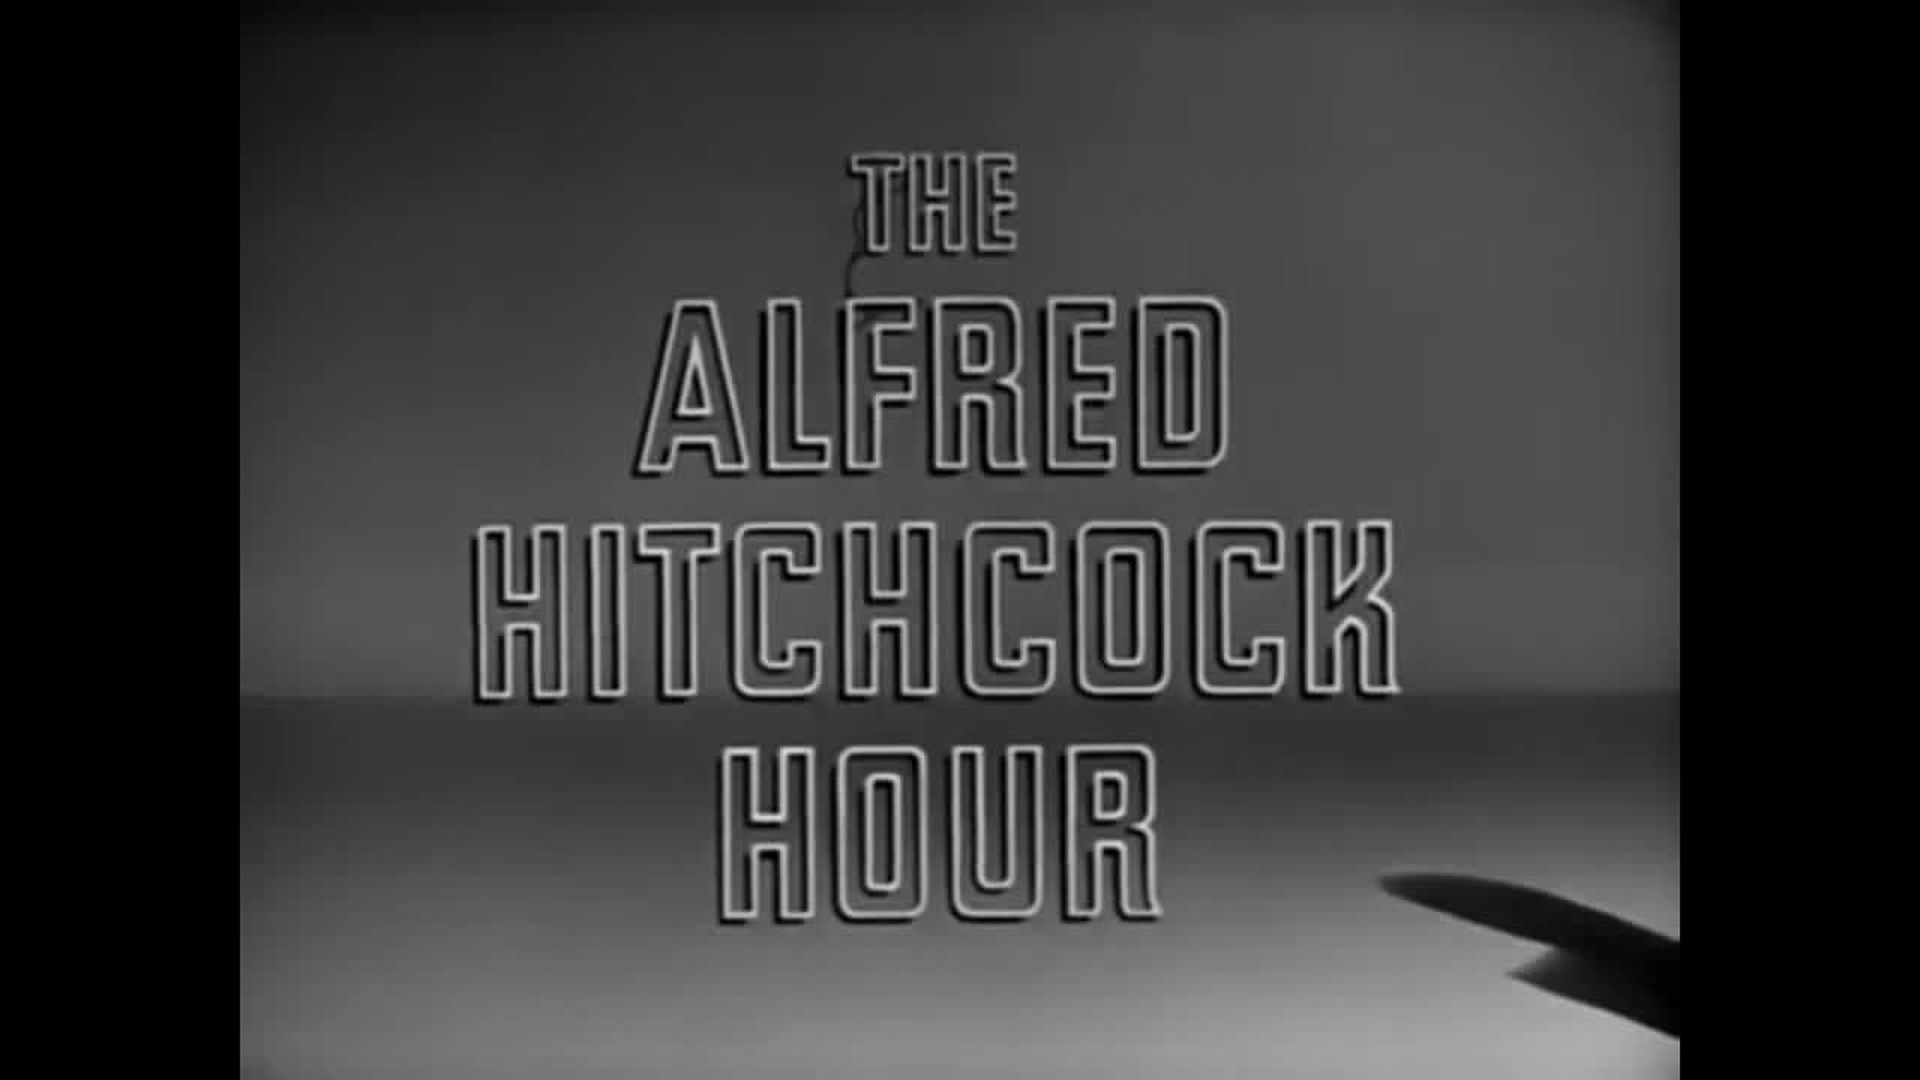 alfred hitchcock hour a tangled web